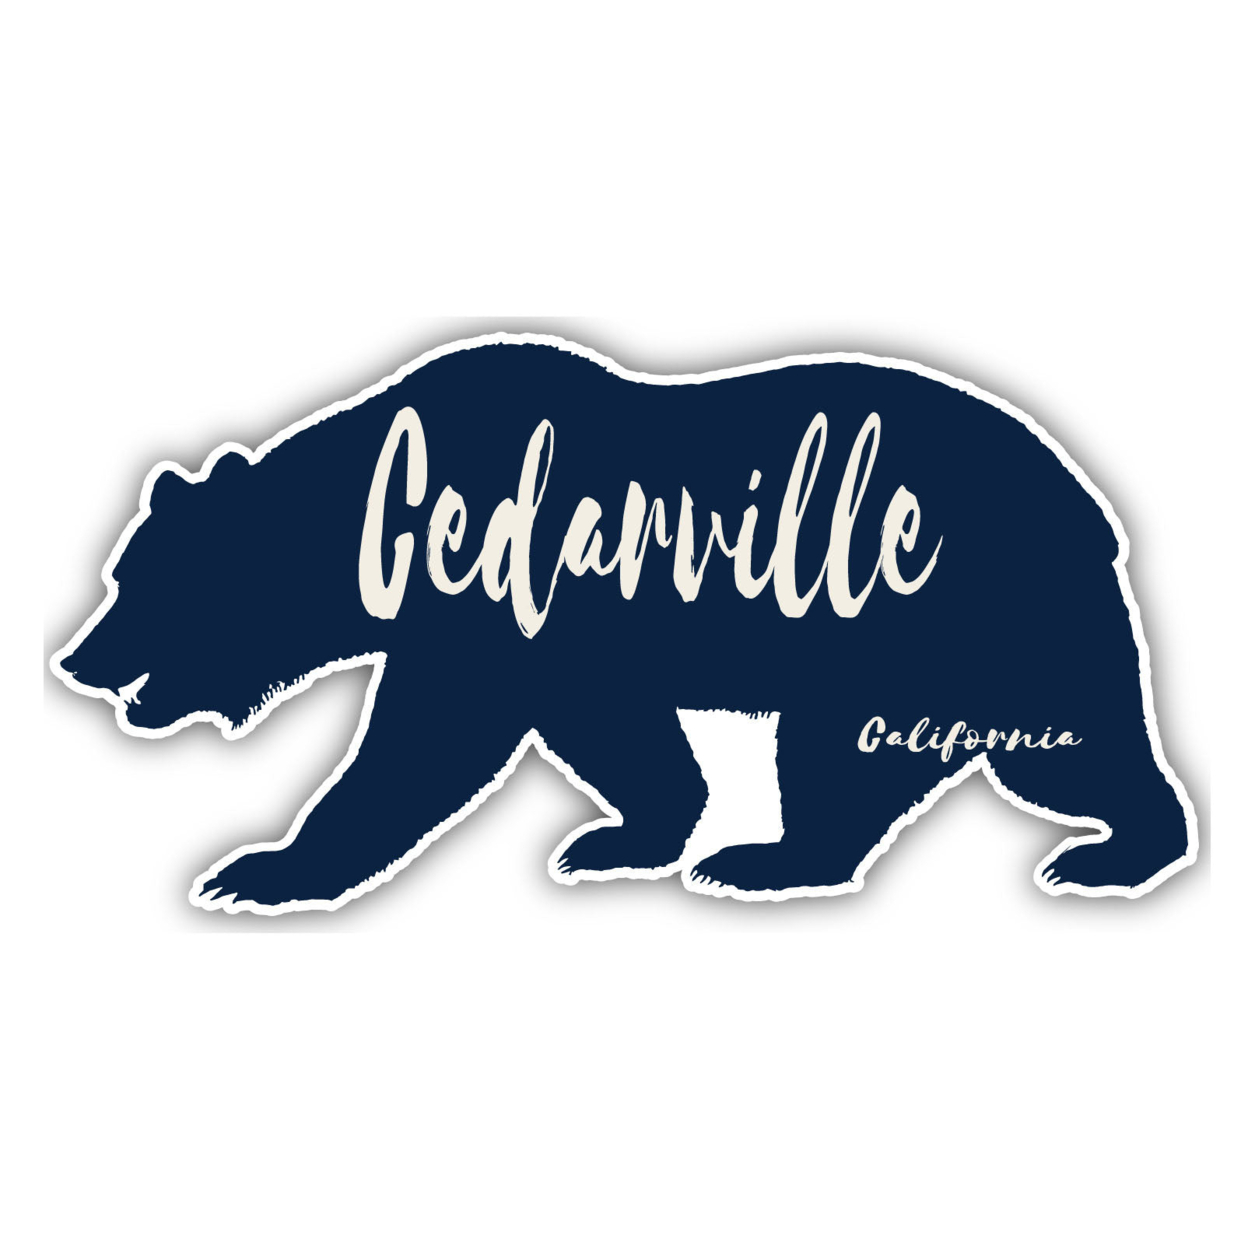 Cedarville California Souvenir Decorative Stickers (Choose Theme And Size) - 4-Pack, 8-Inch, Bear